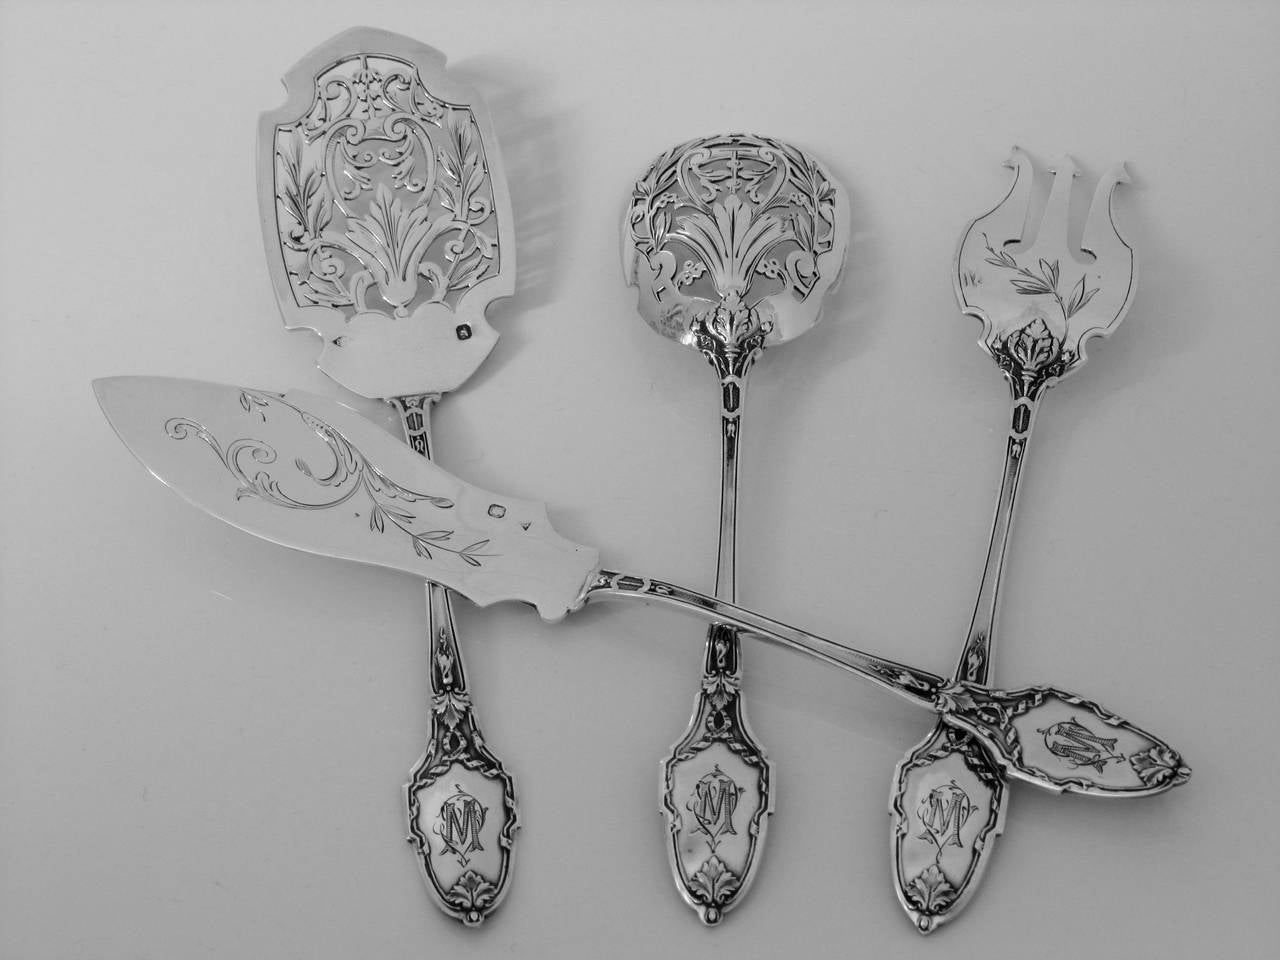 Neoclassical Gorgeous French All Sterling Silver Hors D'oeuvre Set 4 pc w/box Louis XVI-style